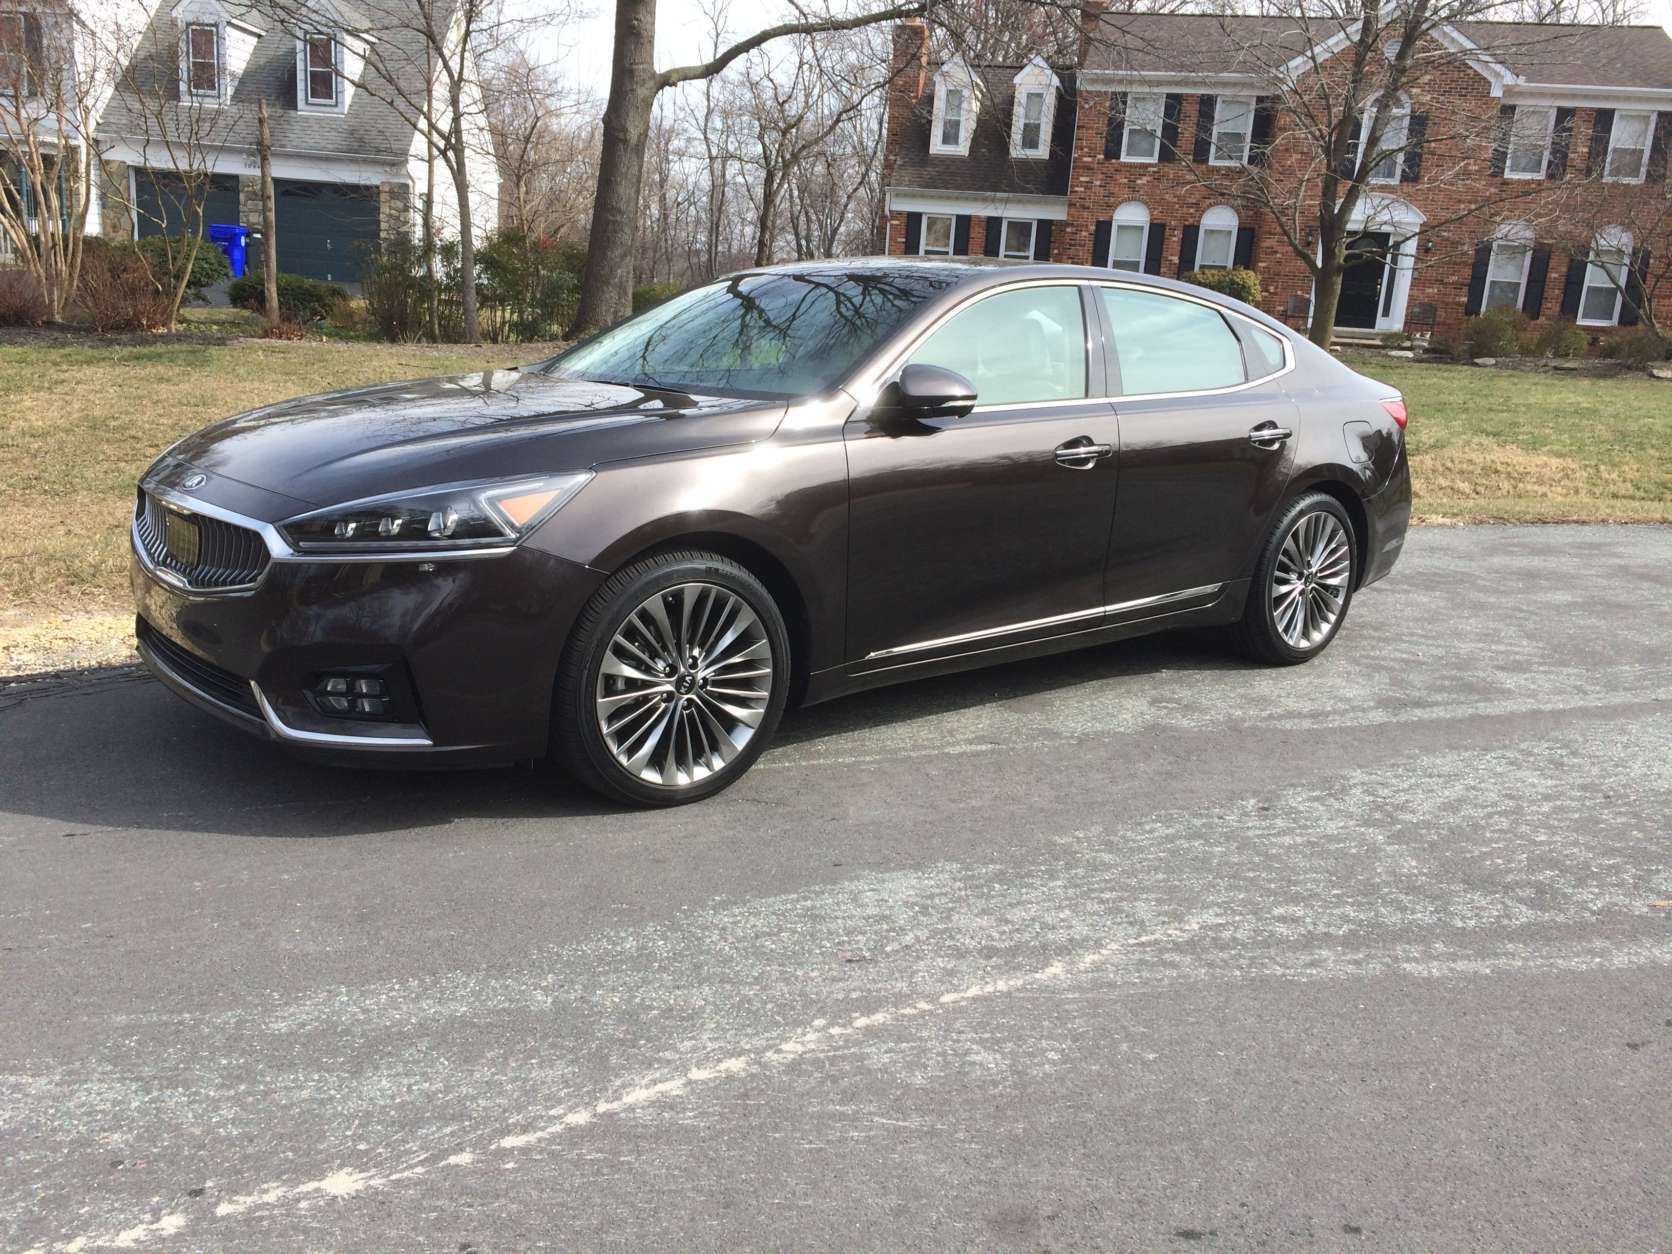 The 2017 Kia Cadenza Limited does a nice job of blurring the line between premium and luxury, offering a near luxury car for a price that’s easier on the wallet. (WTOP/Mike Parris)